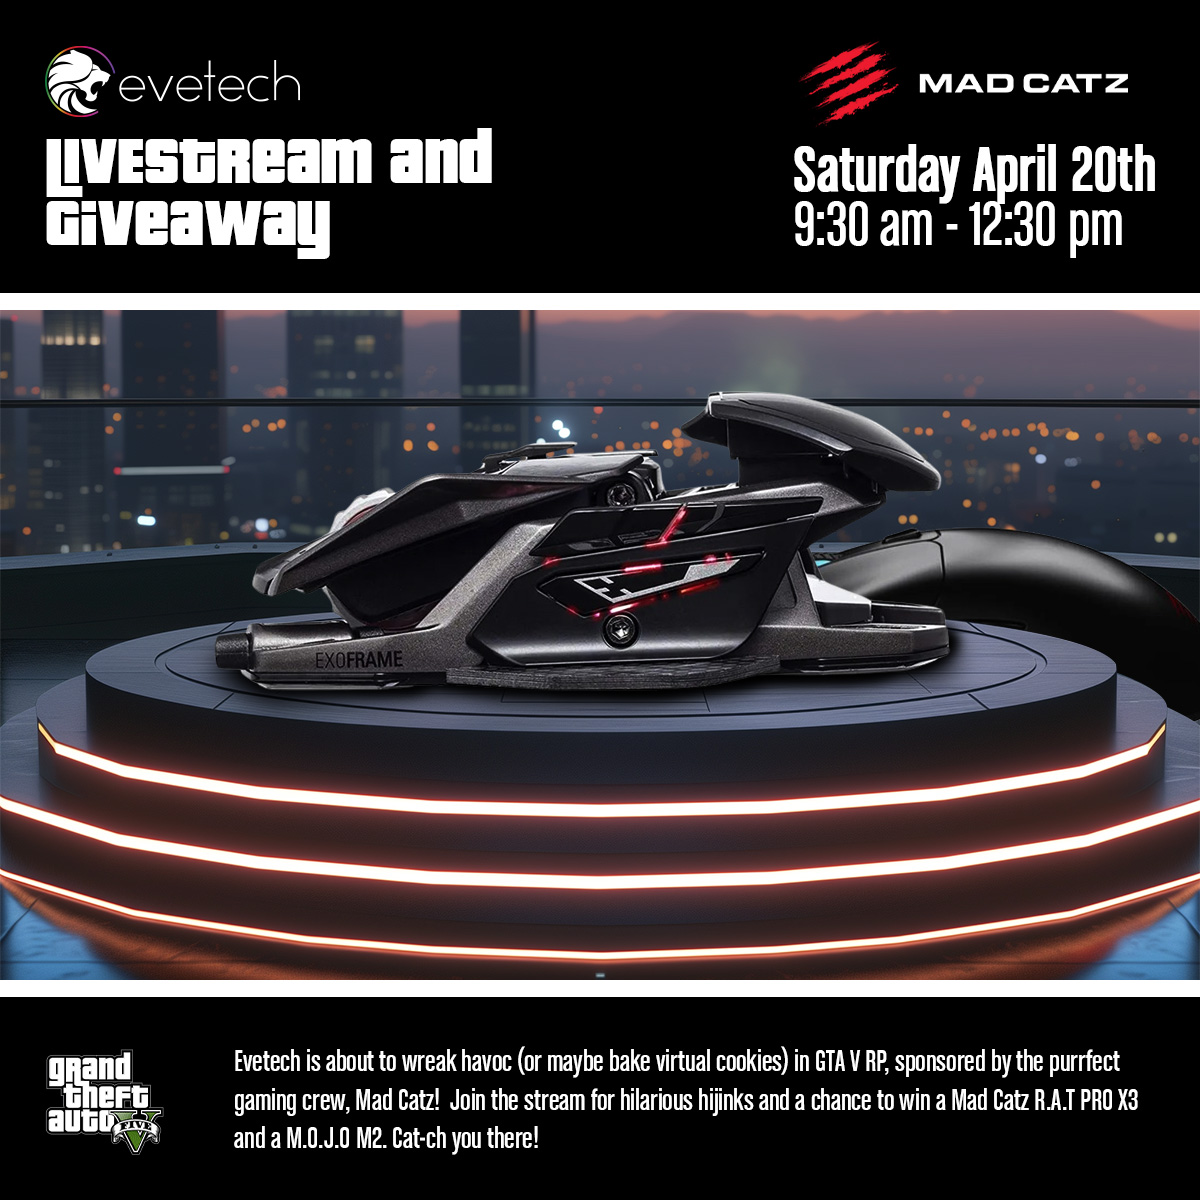 Experience next-level epicness and stand a chance to WIN a Mad Catz R.A.T PRO X3 and a Mad Catz M.O.J.O M2 throughout the stream!

🟪When: Saturday, April 20th
🟪Time: 9:30 am - 12:30 pm
🟪Where (to watch): loom.ly/iju8Rb0

Powered by @evetech

#livestream #giveaway